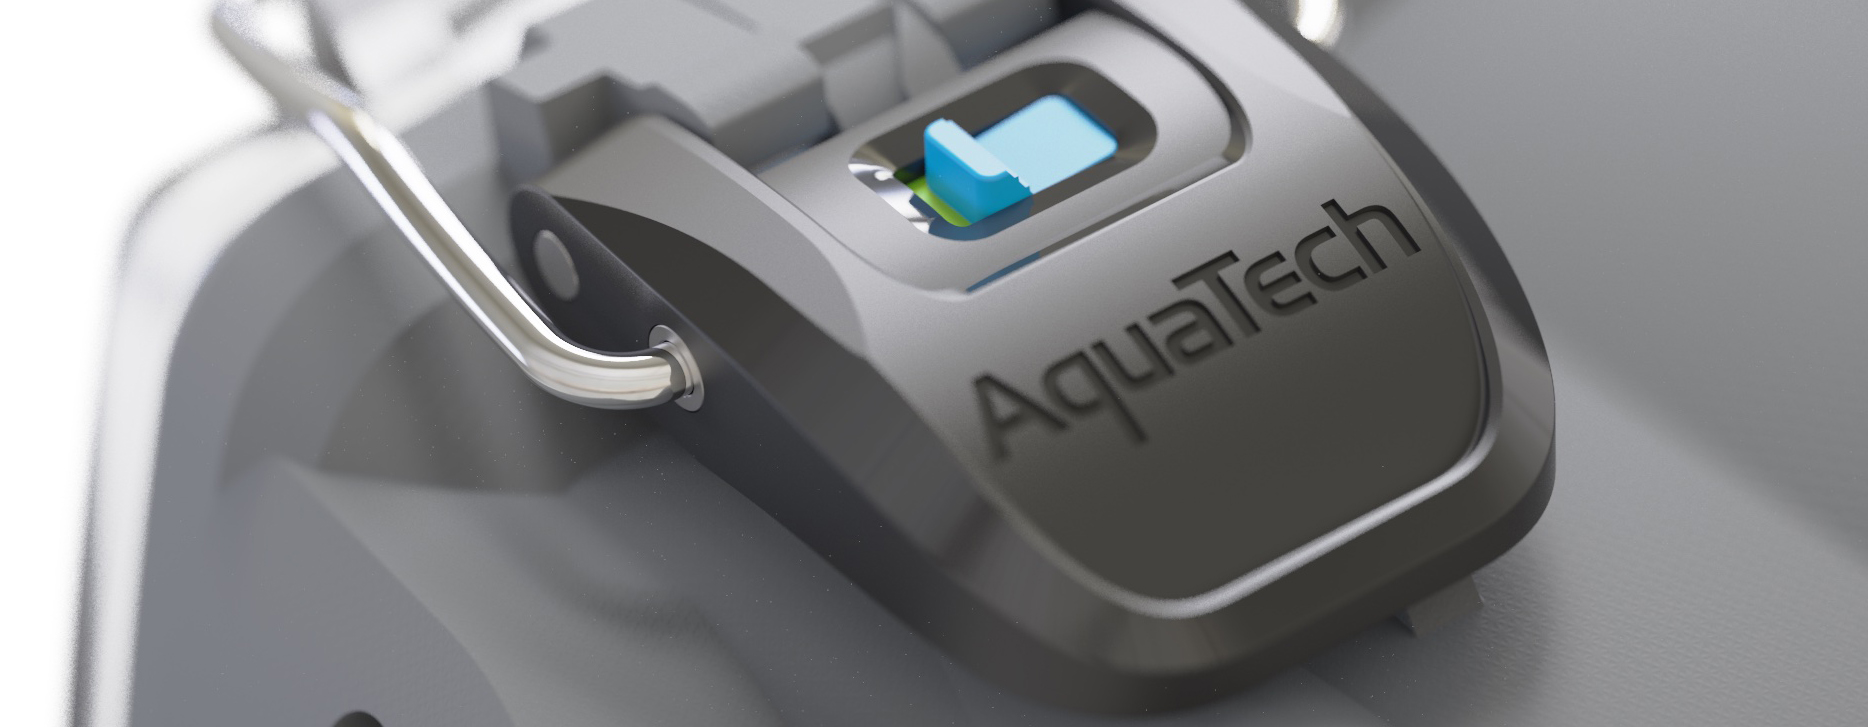 latch developed for Aquatech camera housing product